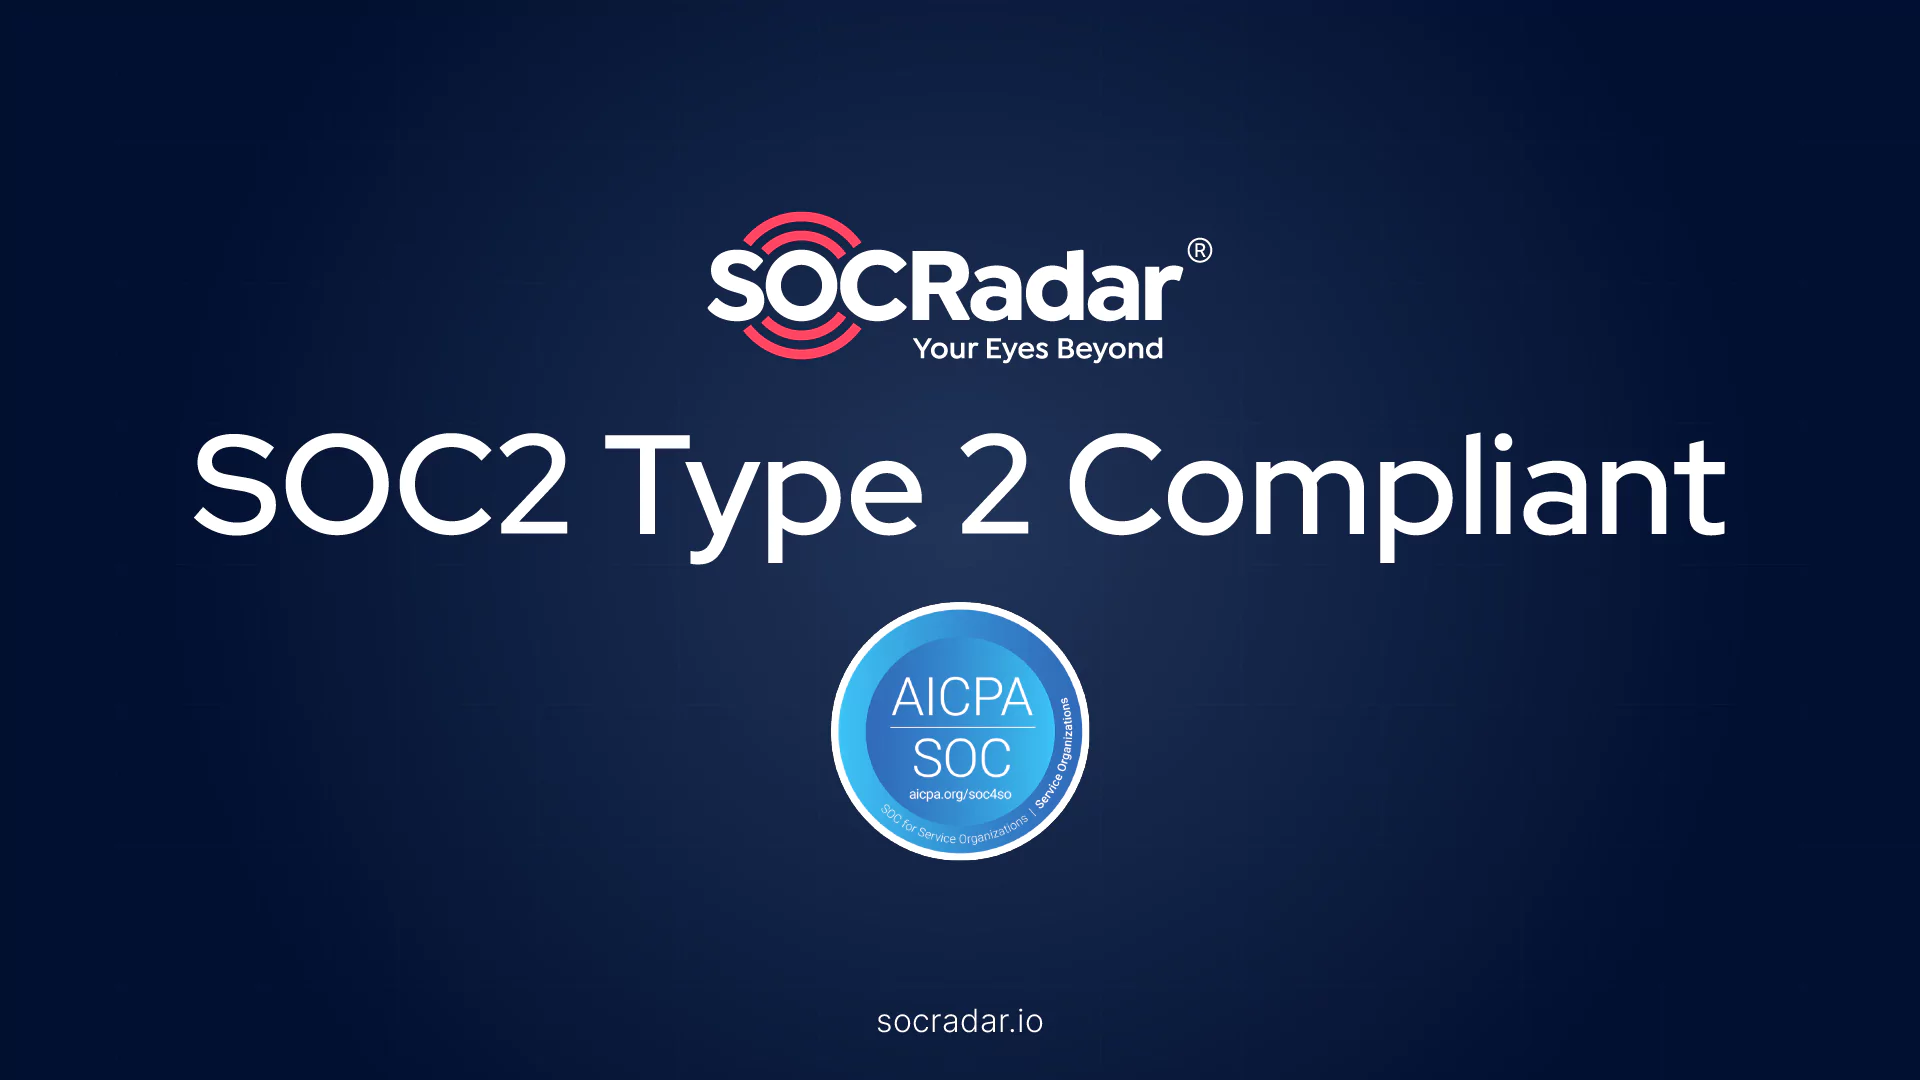 SOCRadar® Cyber Intelligence Inc. | Your Data is Secure and Private with SOC 2 Type 2 Compliant SOCRadar